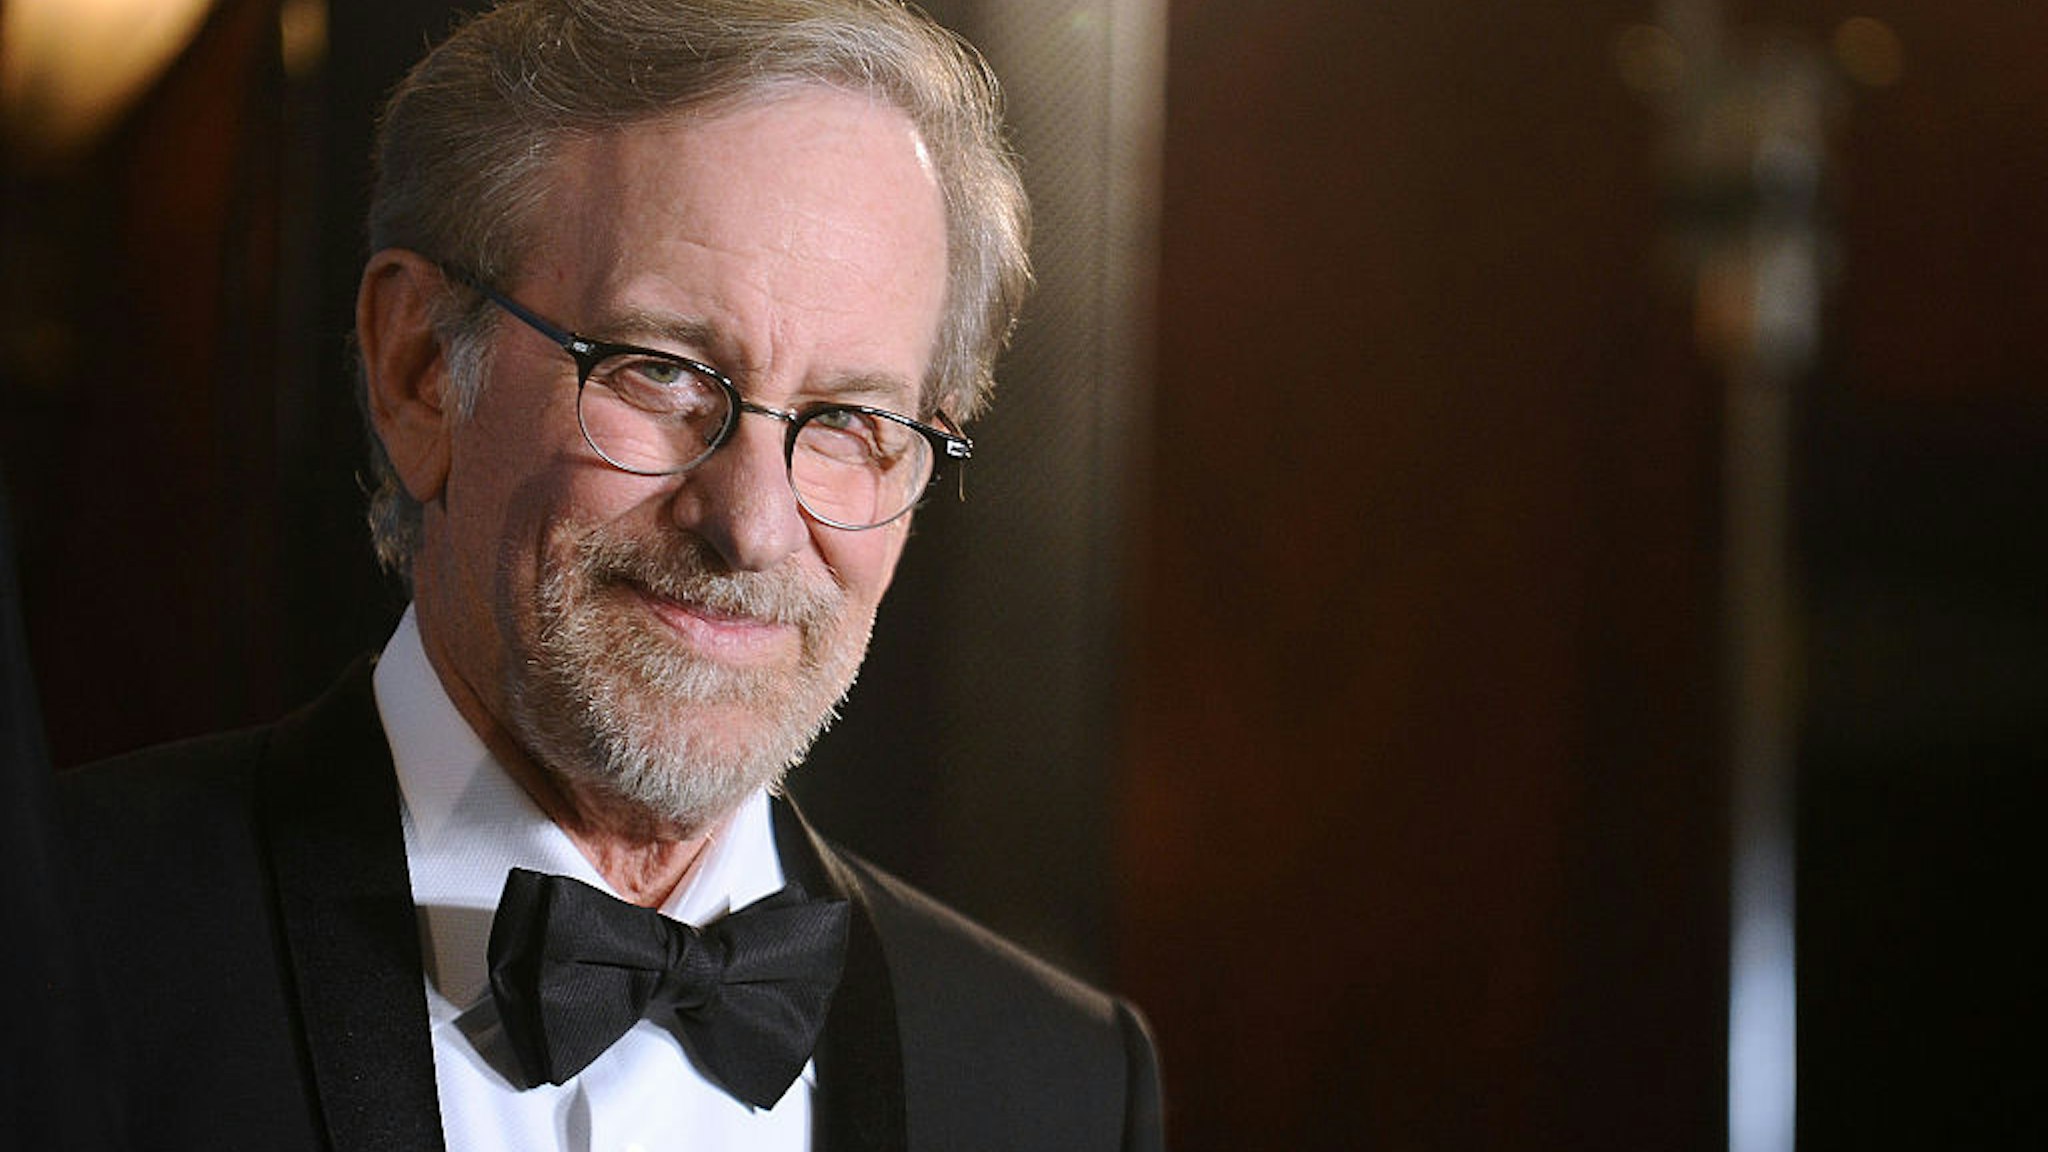 LOS ANGELES, CA - FEBRUARY 06: Director Steven Spielberg poses in the press room at the 68th annual Directors Guild of America Awards at the Hyatt Regency Century Plaza on February 6, 2016 in Los Angeles, California. (Photo by Jason LaVeris/FilmMagic)